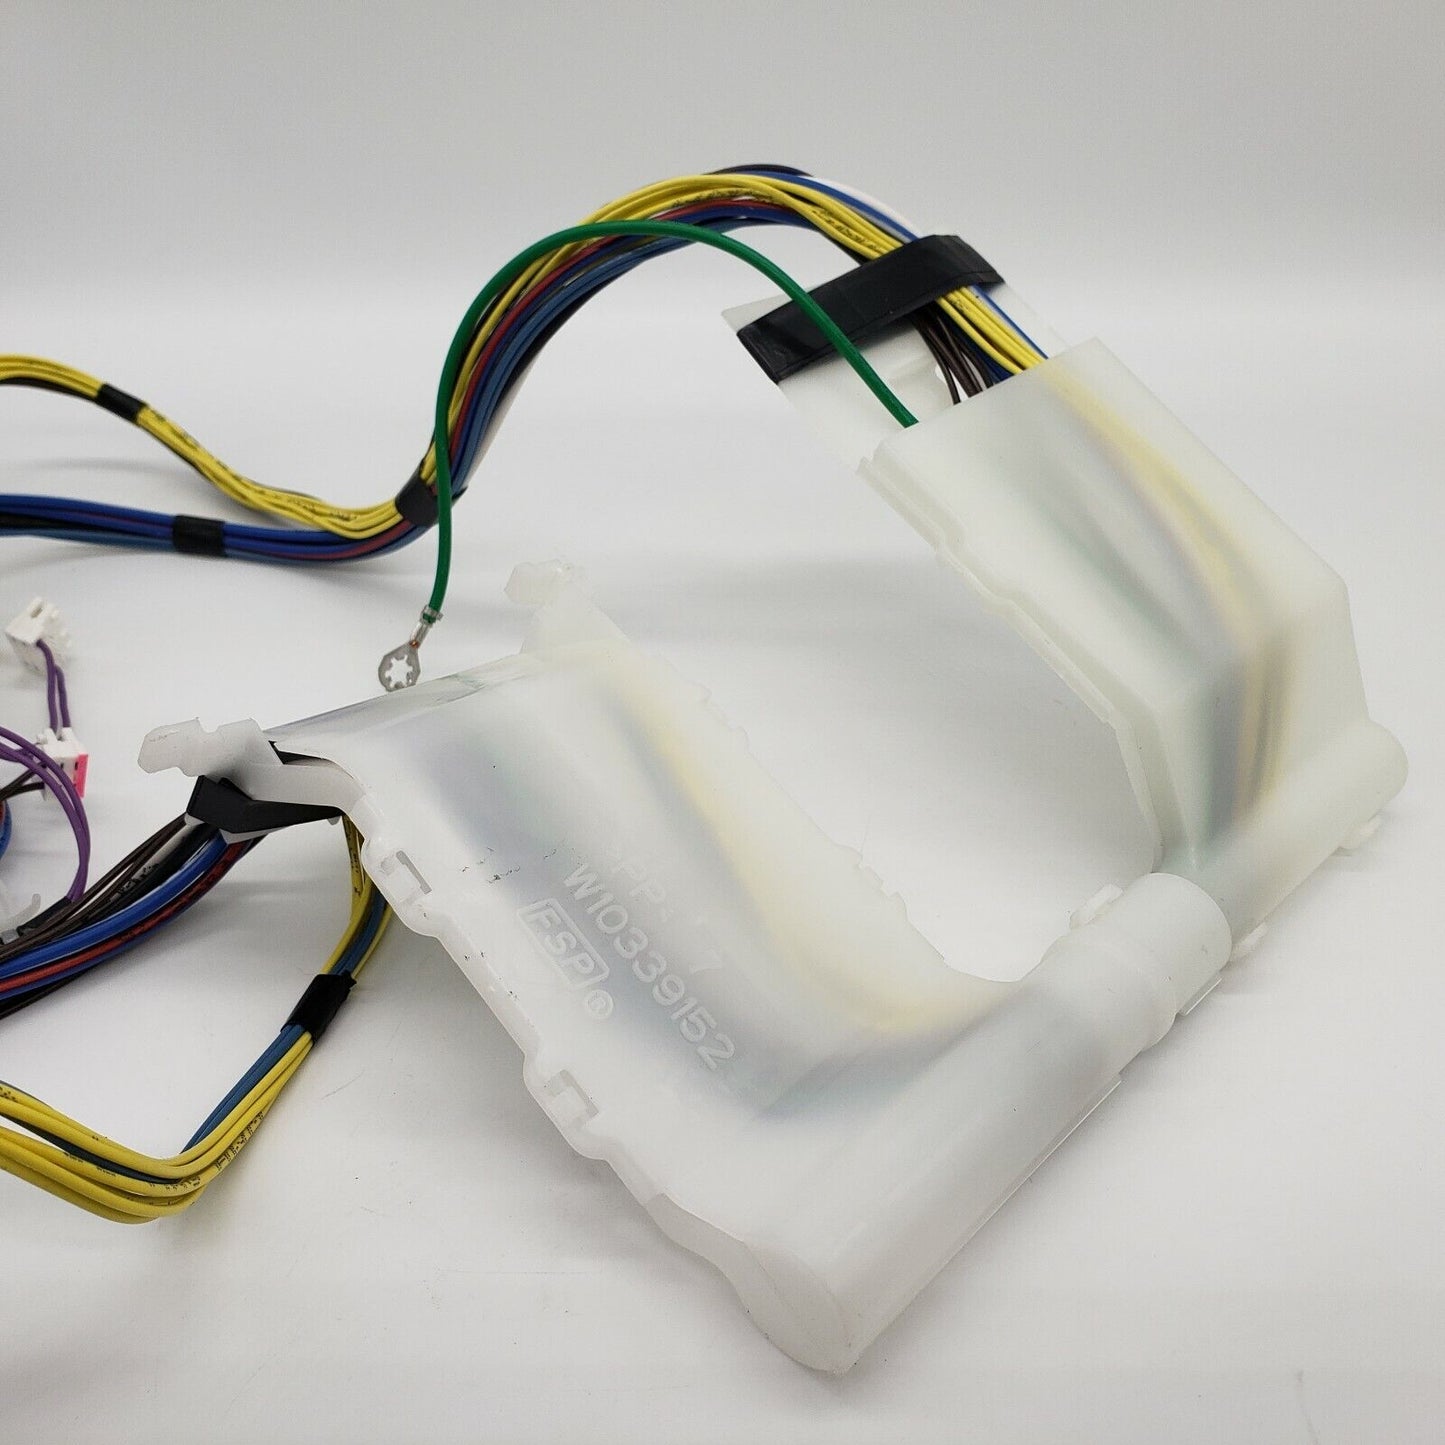 NEW Replacement for Whirlpool Dishwasher Wire Harness W10339152 - 1 YEAR